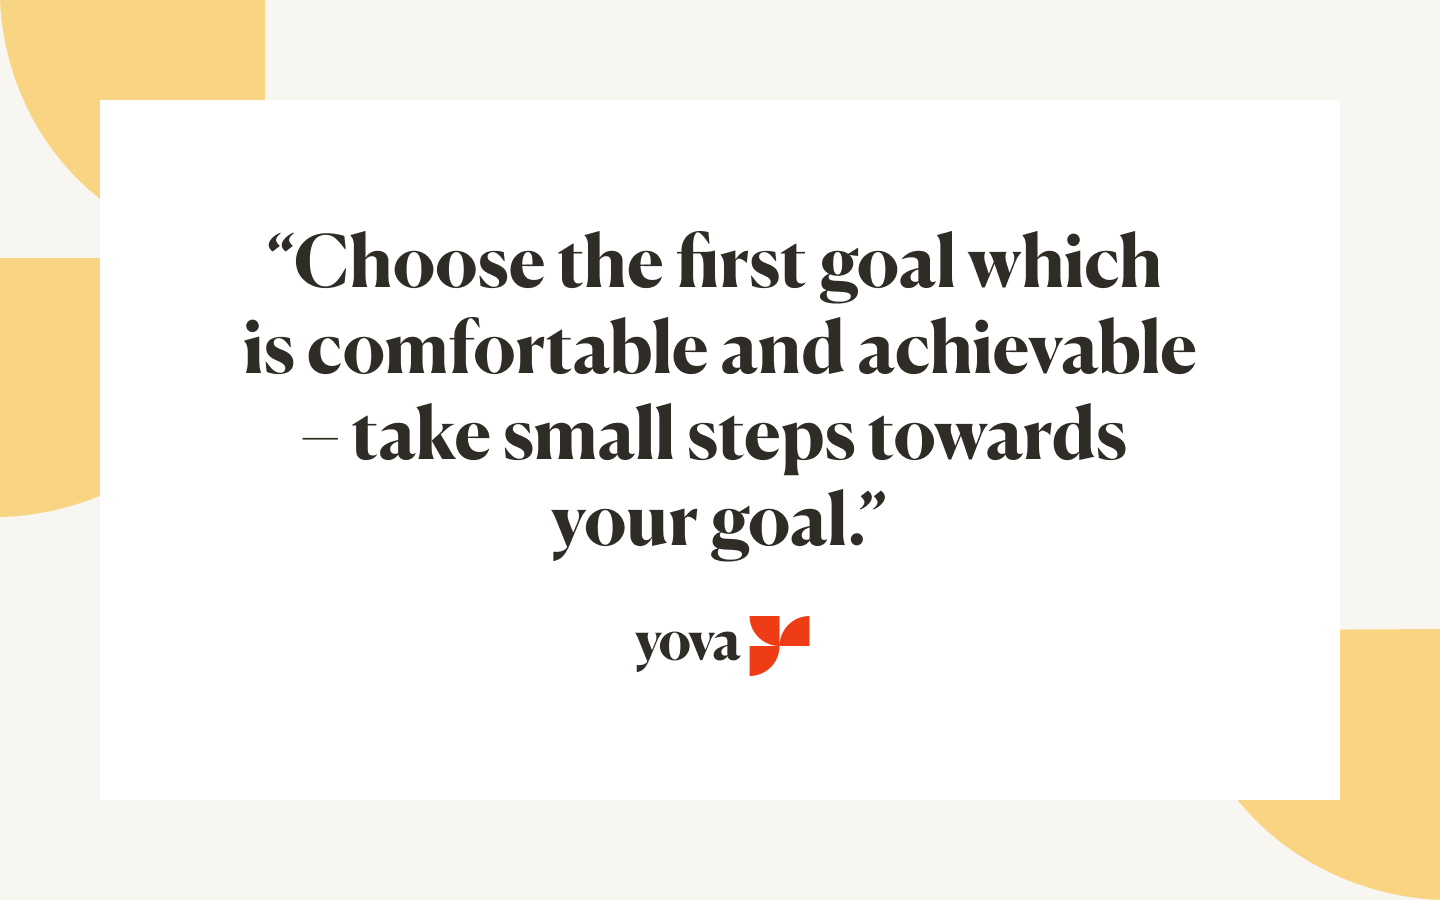 Quote from Rhytima Shinde saying "Choose the first goal which is comfortable and achievable - take small steps towards your goal." 